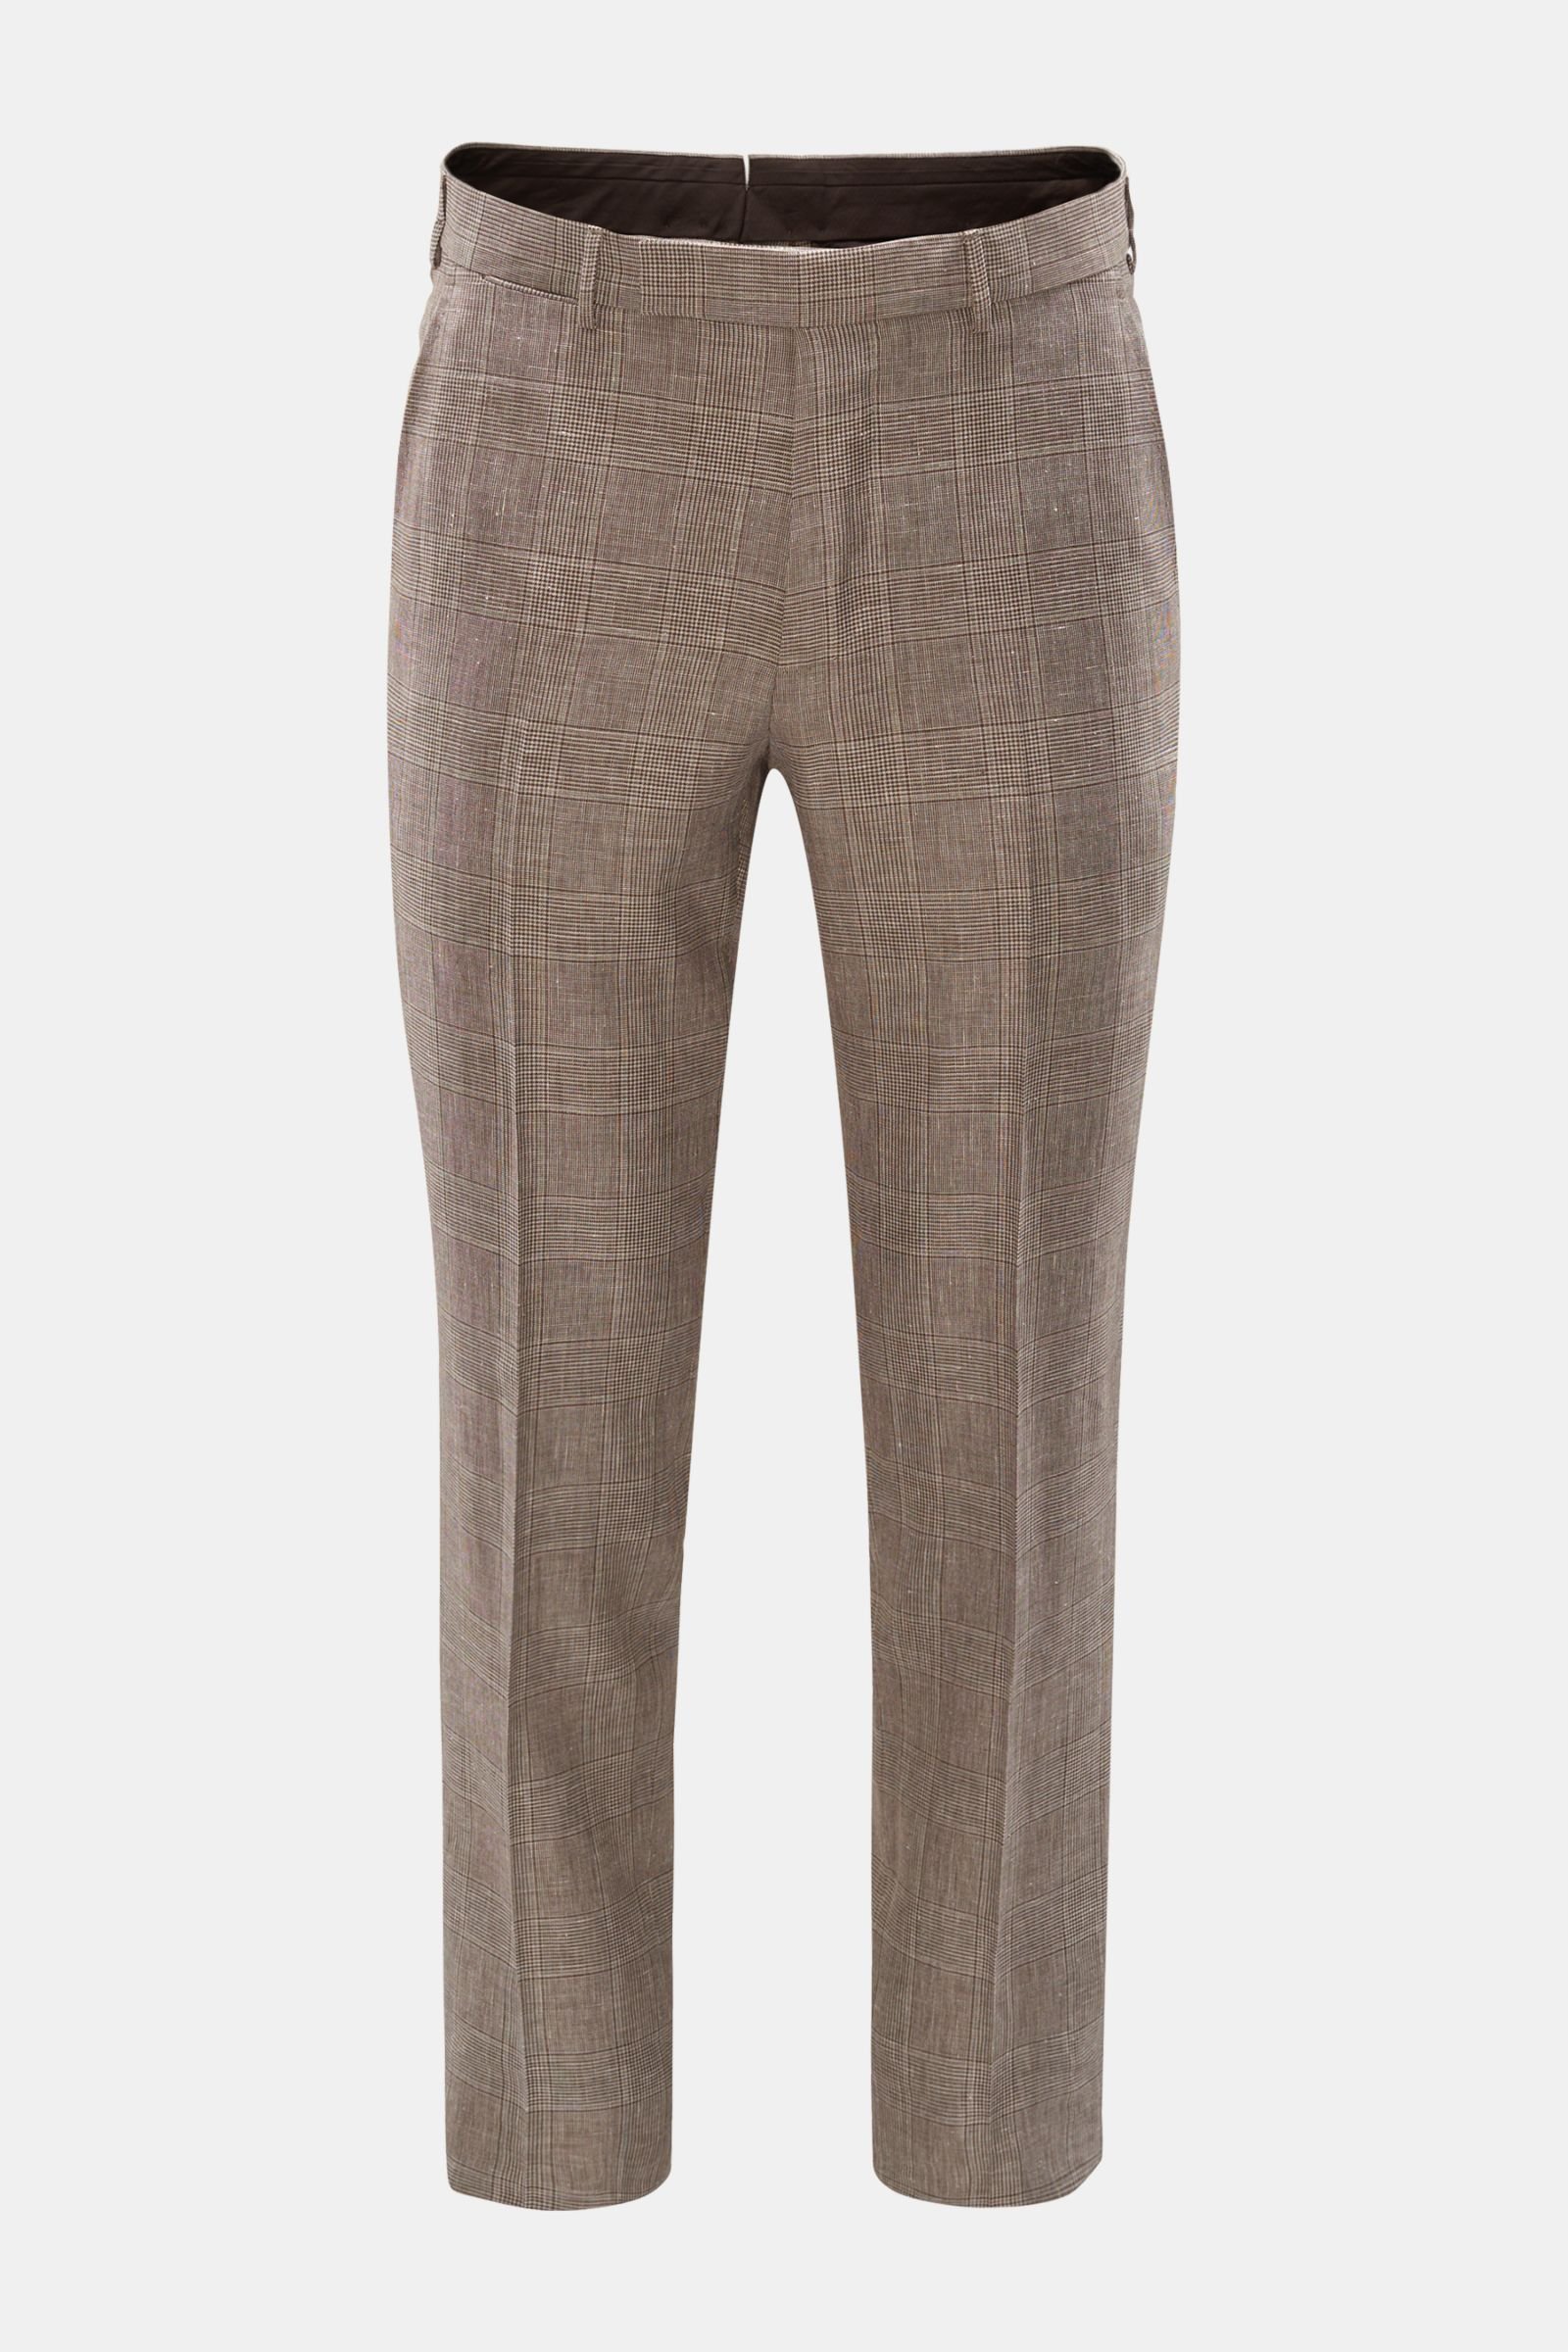 Trousers brown/grey-brown checked